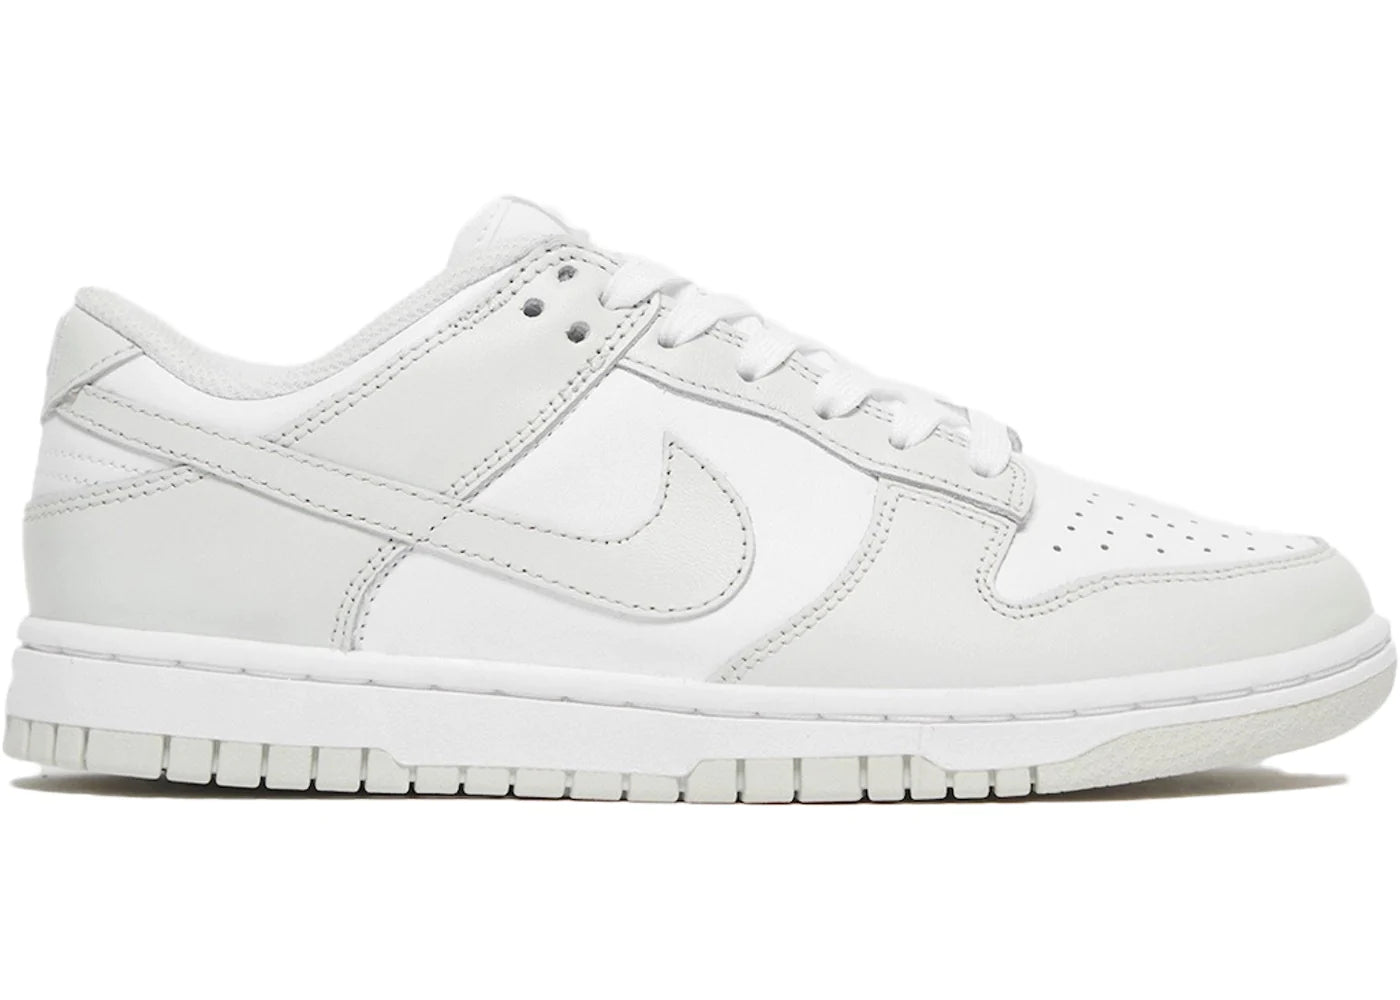 Nike Dunk Low - Photon Dust